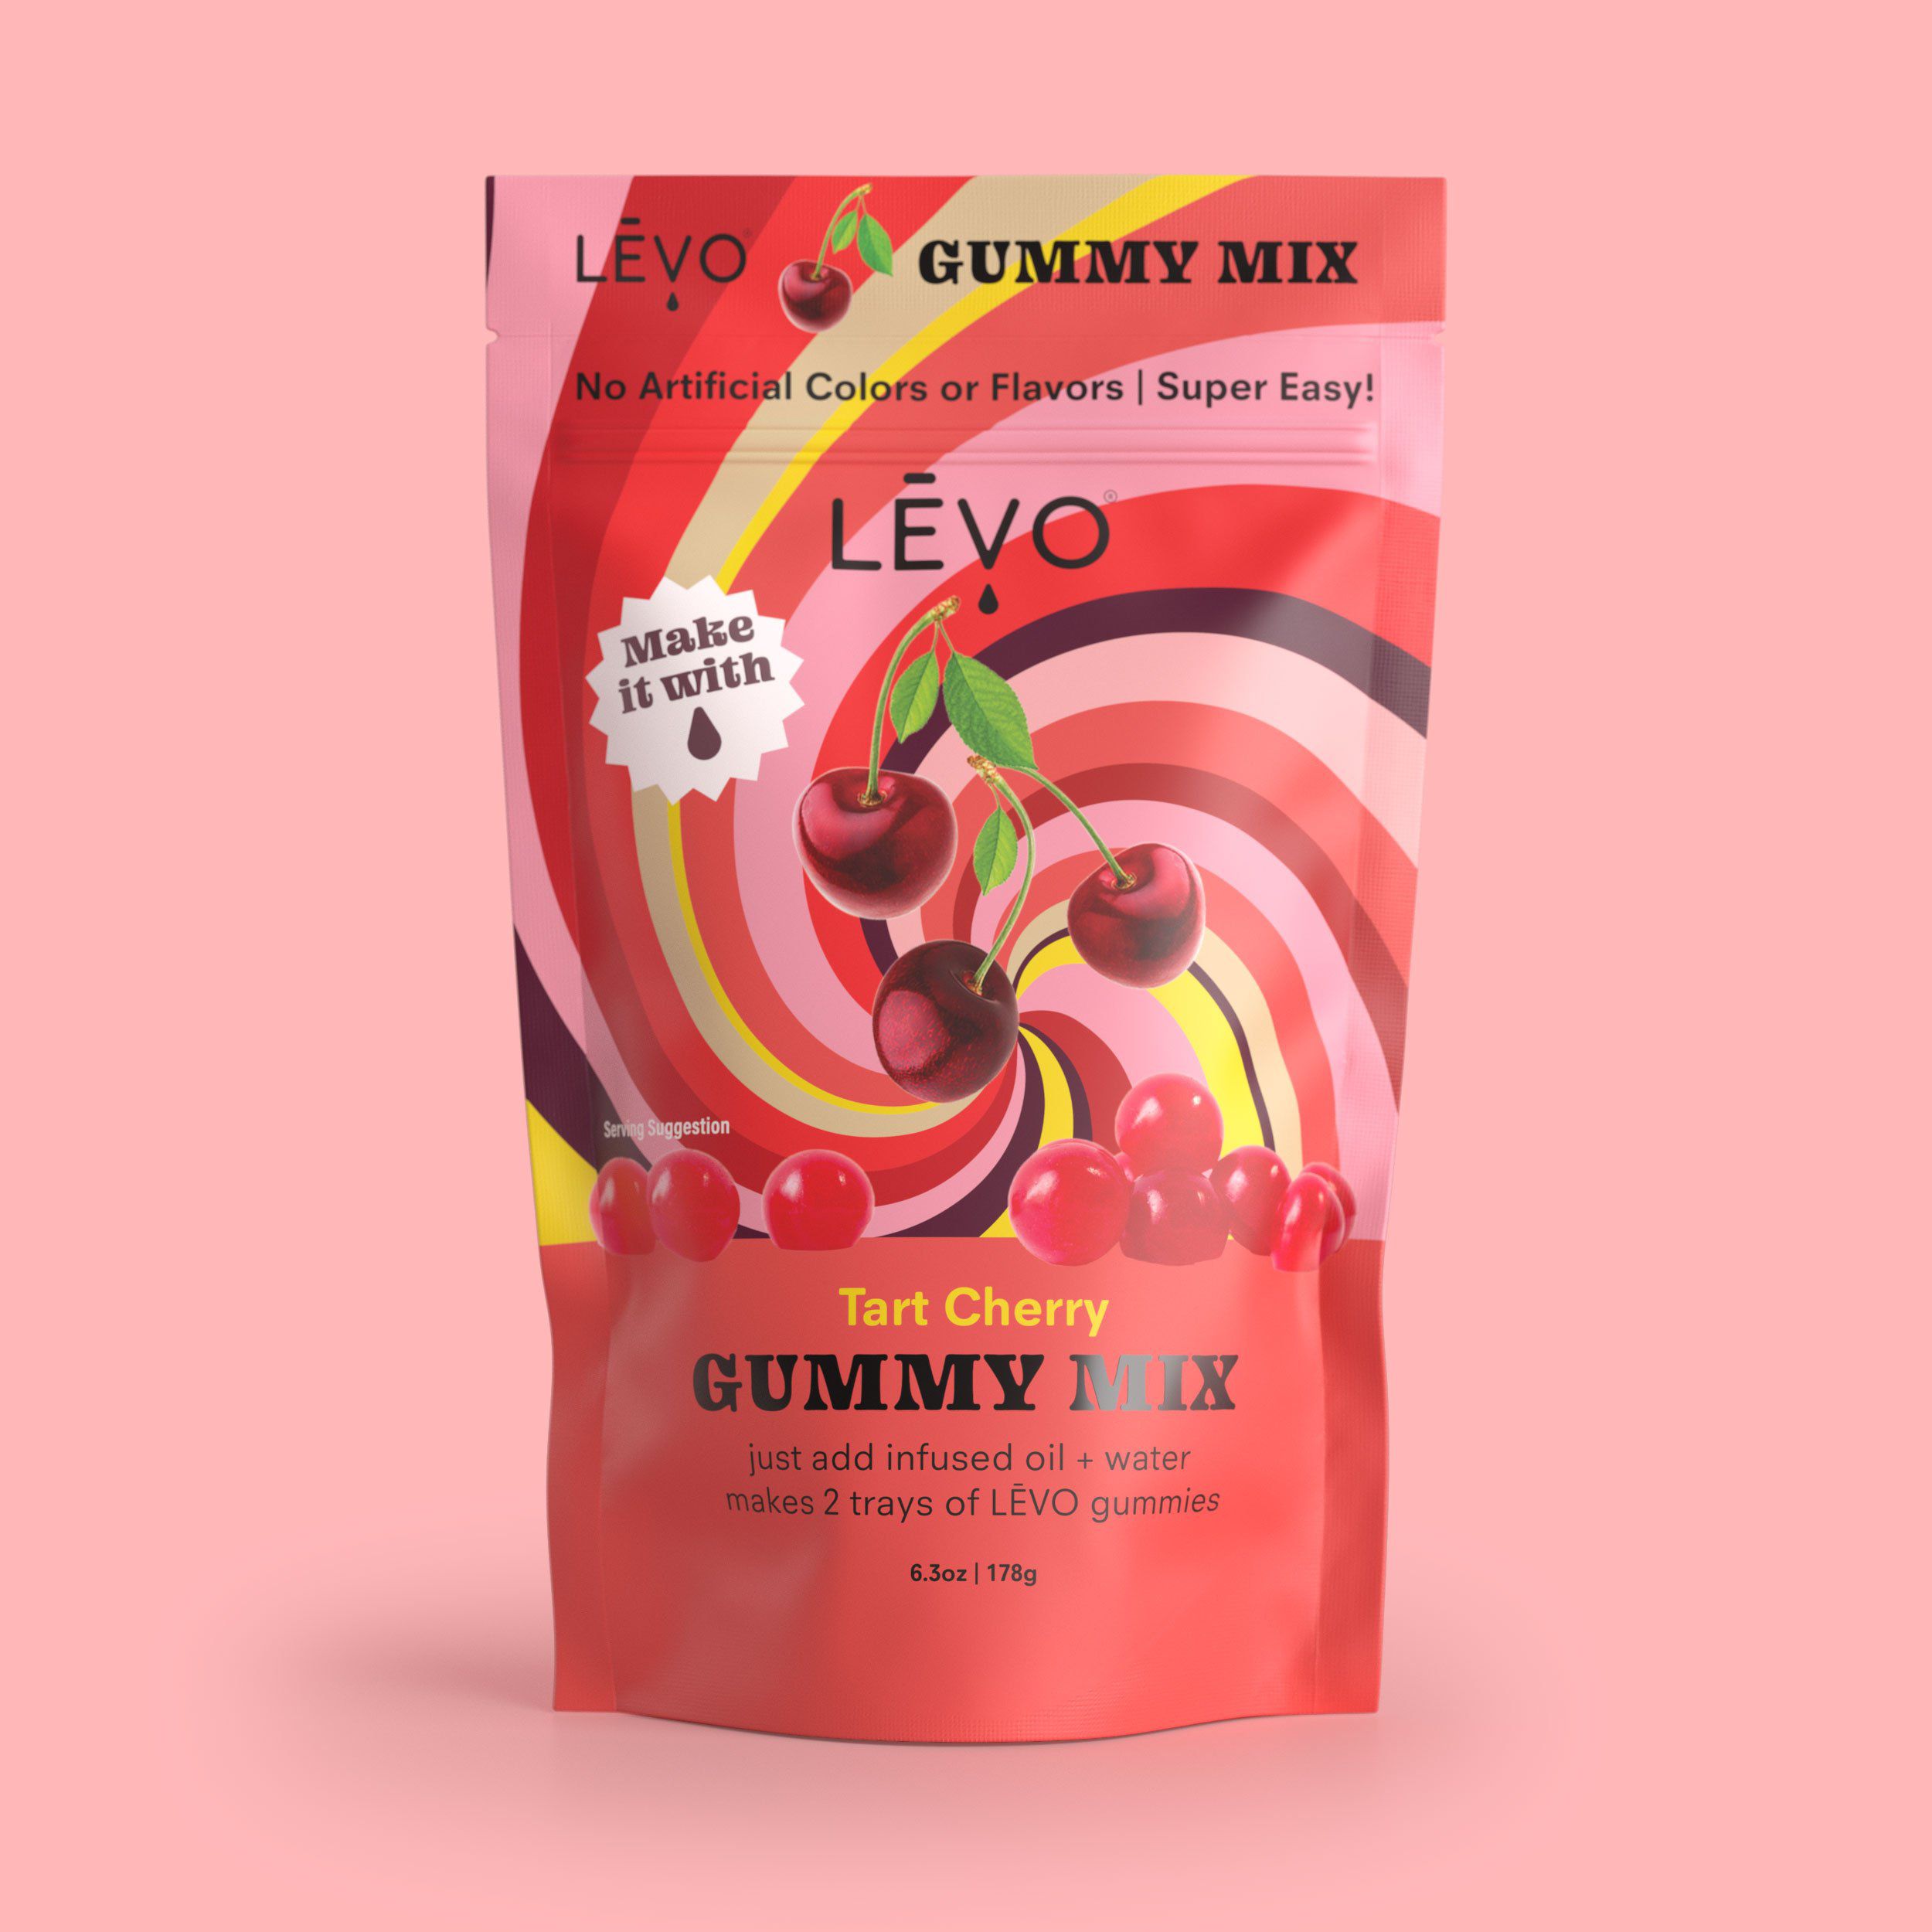 LEVO makes it easy to have your own infused treats for yourself and to share with friends. Each bag of LEVO gummy powder mix fills 2 trays, that's 64 gummies!